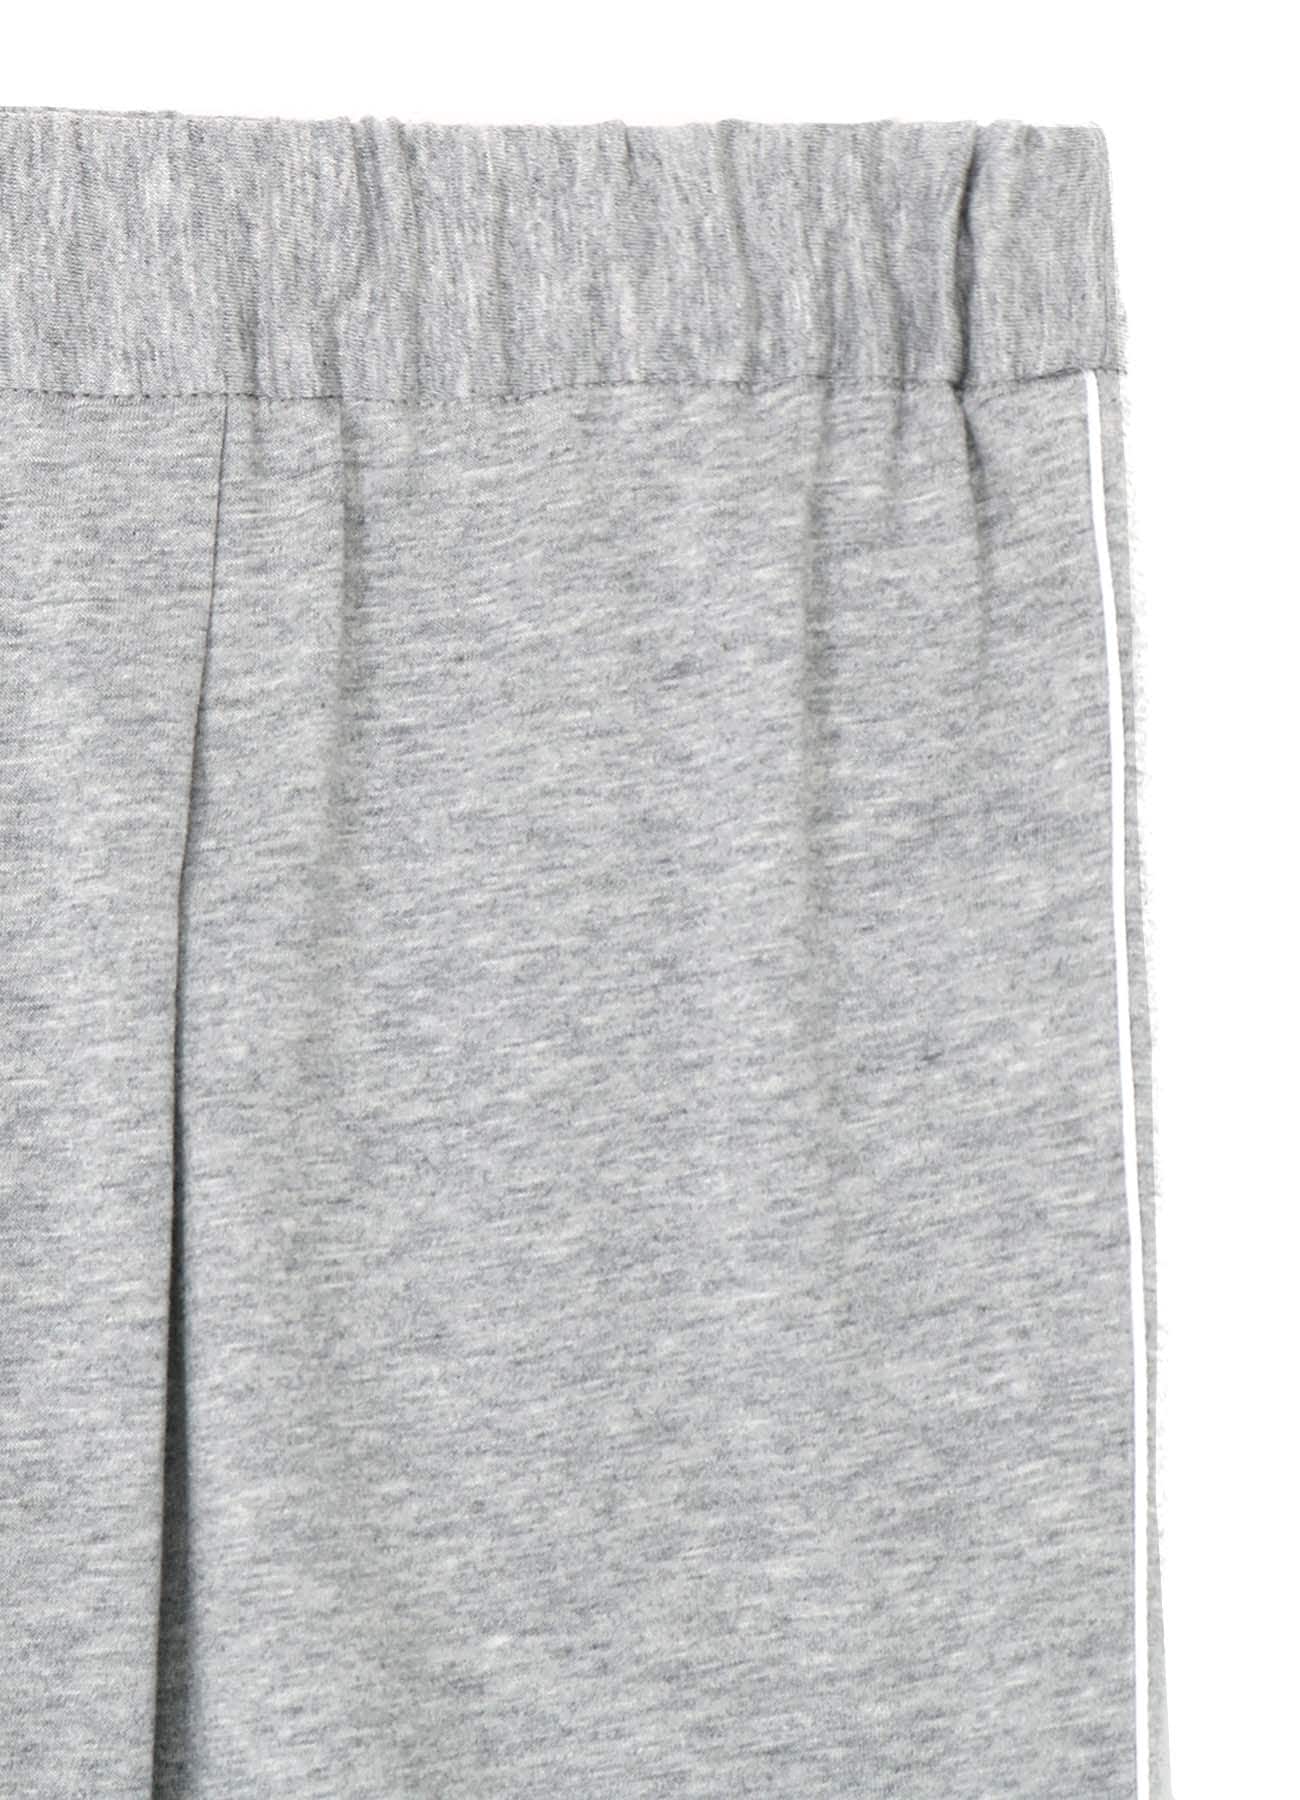 30/1 ORGANIC COTTON JERSEY PANTS (M)(M Top Gray): Y's for living 